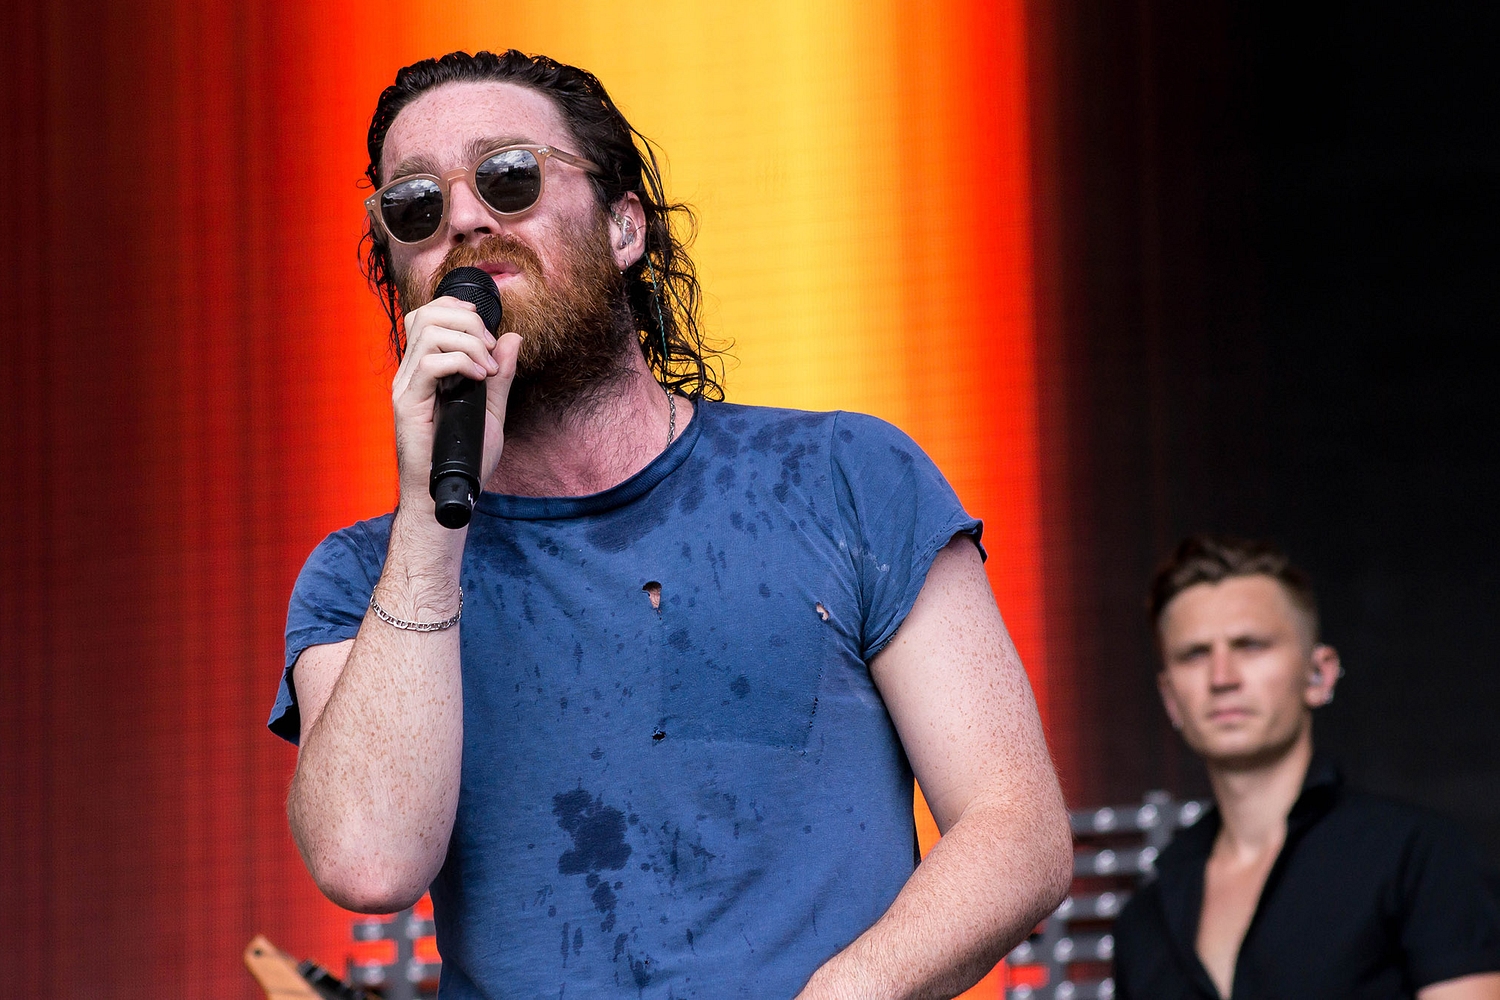 Nick Murphy (fka Chet Faker) won’t be stopped on new track ‘Stop Me (Stop You)’